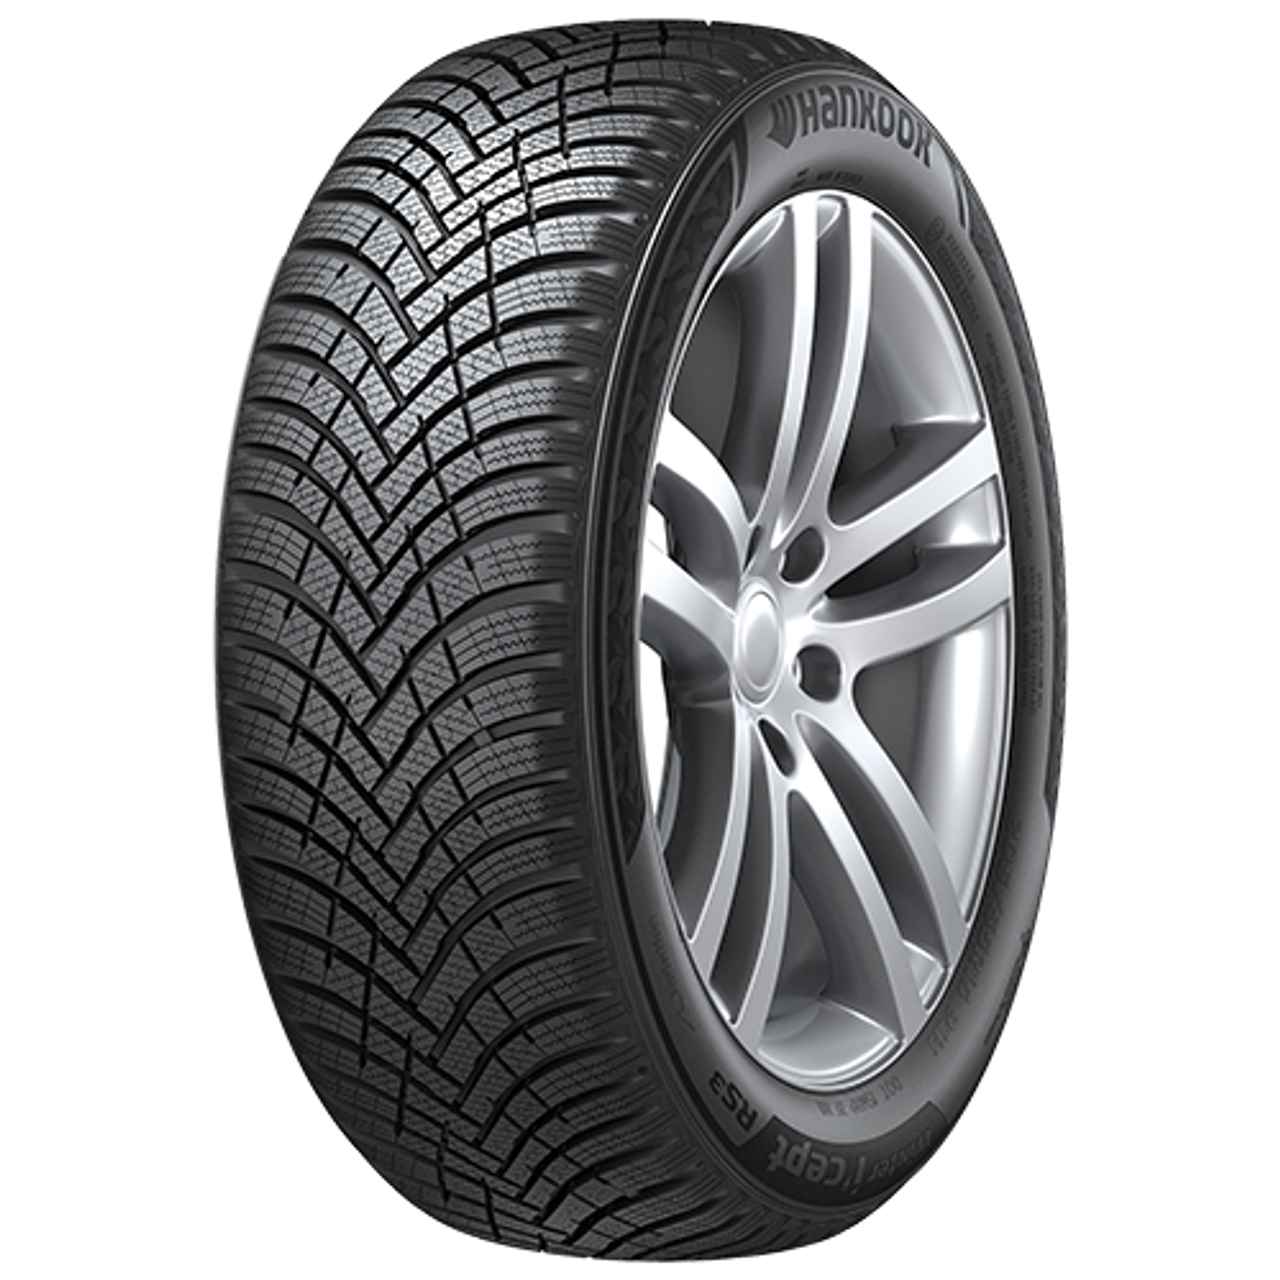 HANKOOK WINTER I*CEPT RS3 195/50R16 88H BSW